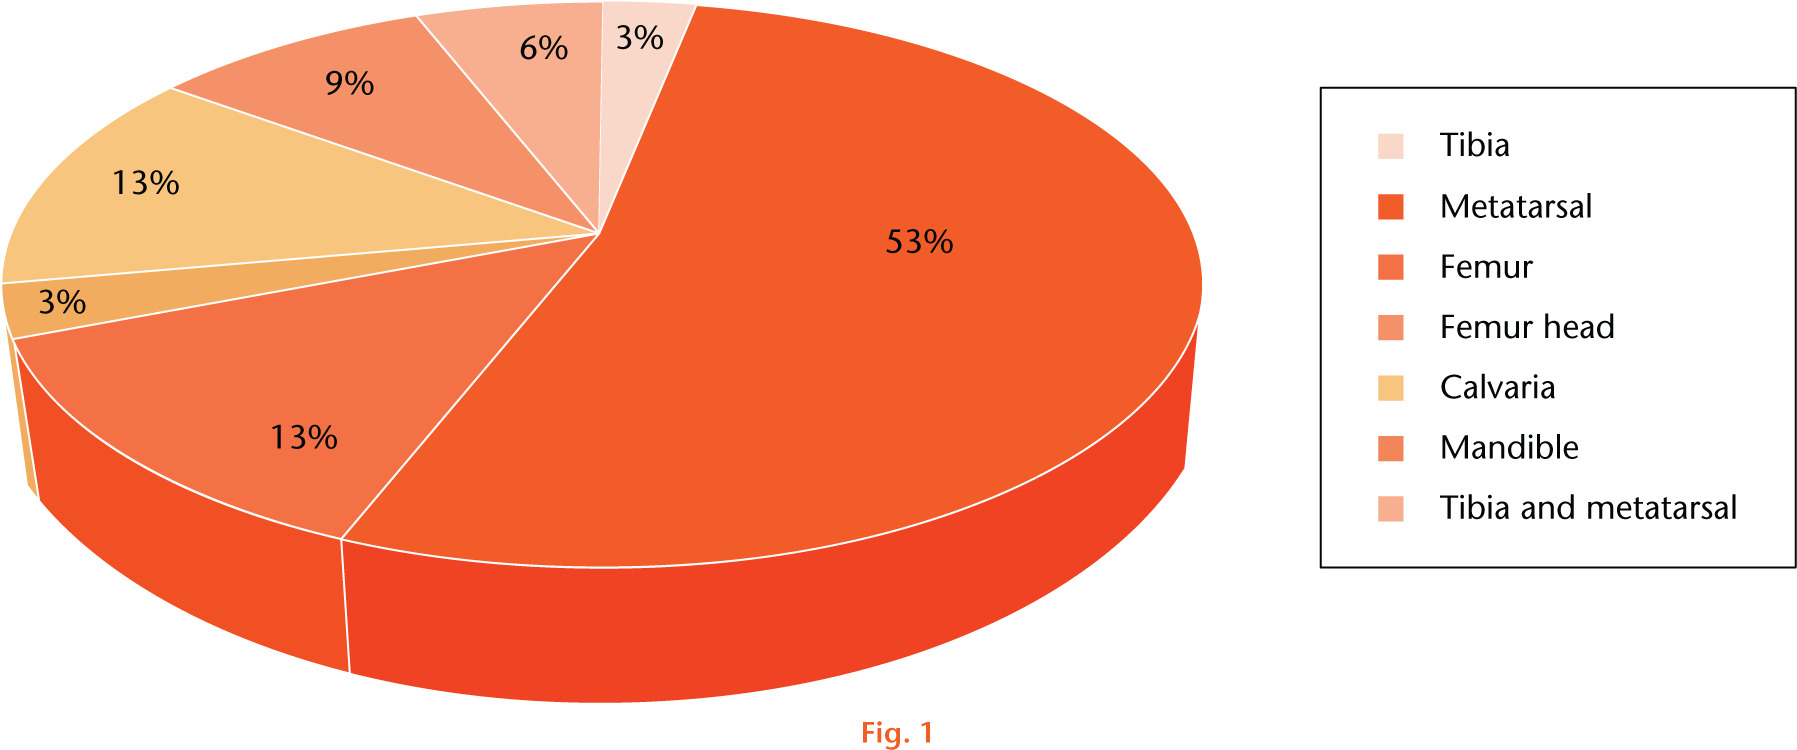 Fig. 1 
            Pie chart showing percentage distribution from the various species of rodent and the types of bones used for ex vivo bone growth studies based on the available studies published from 2000.
          